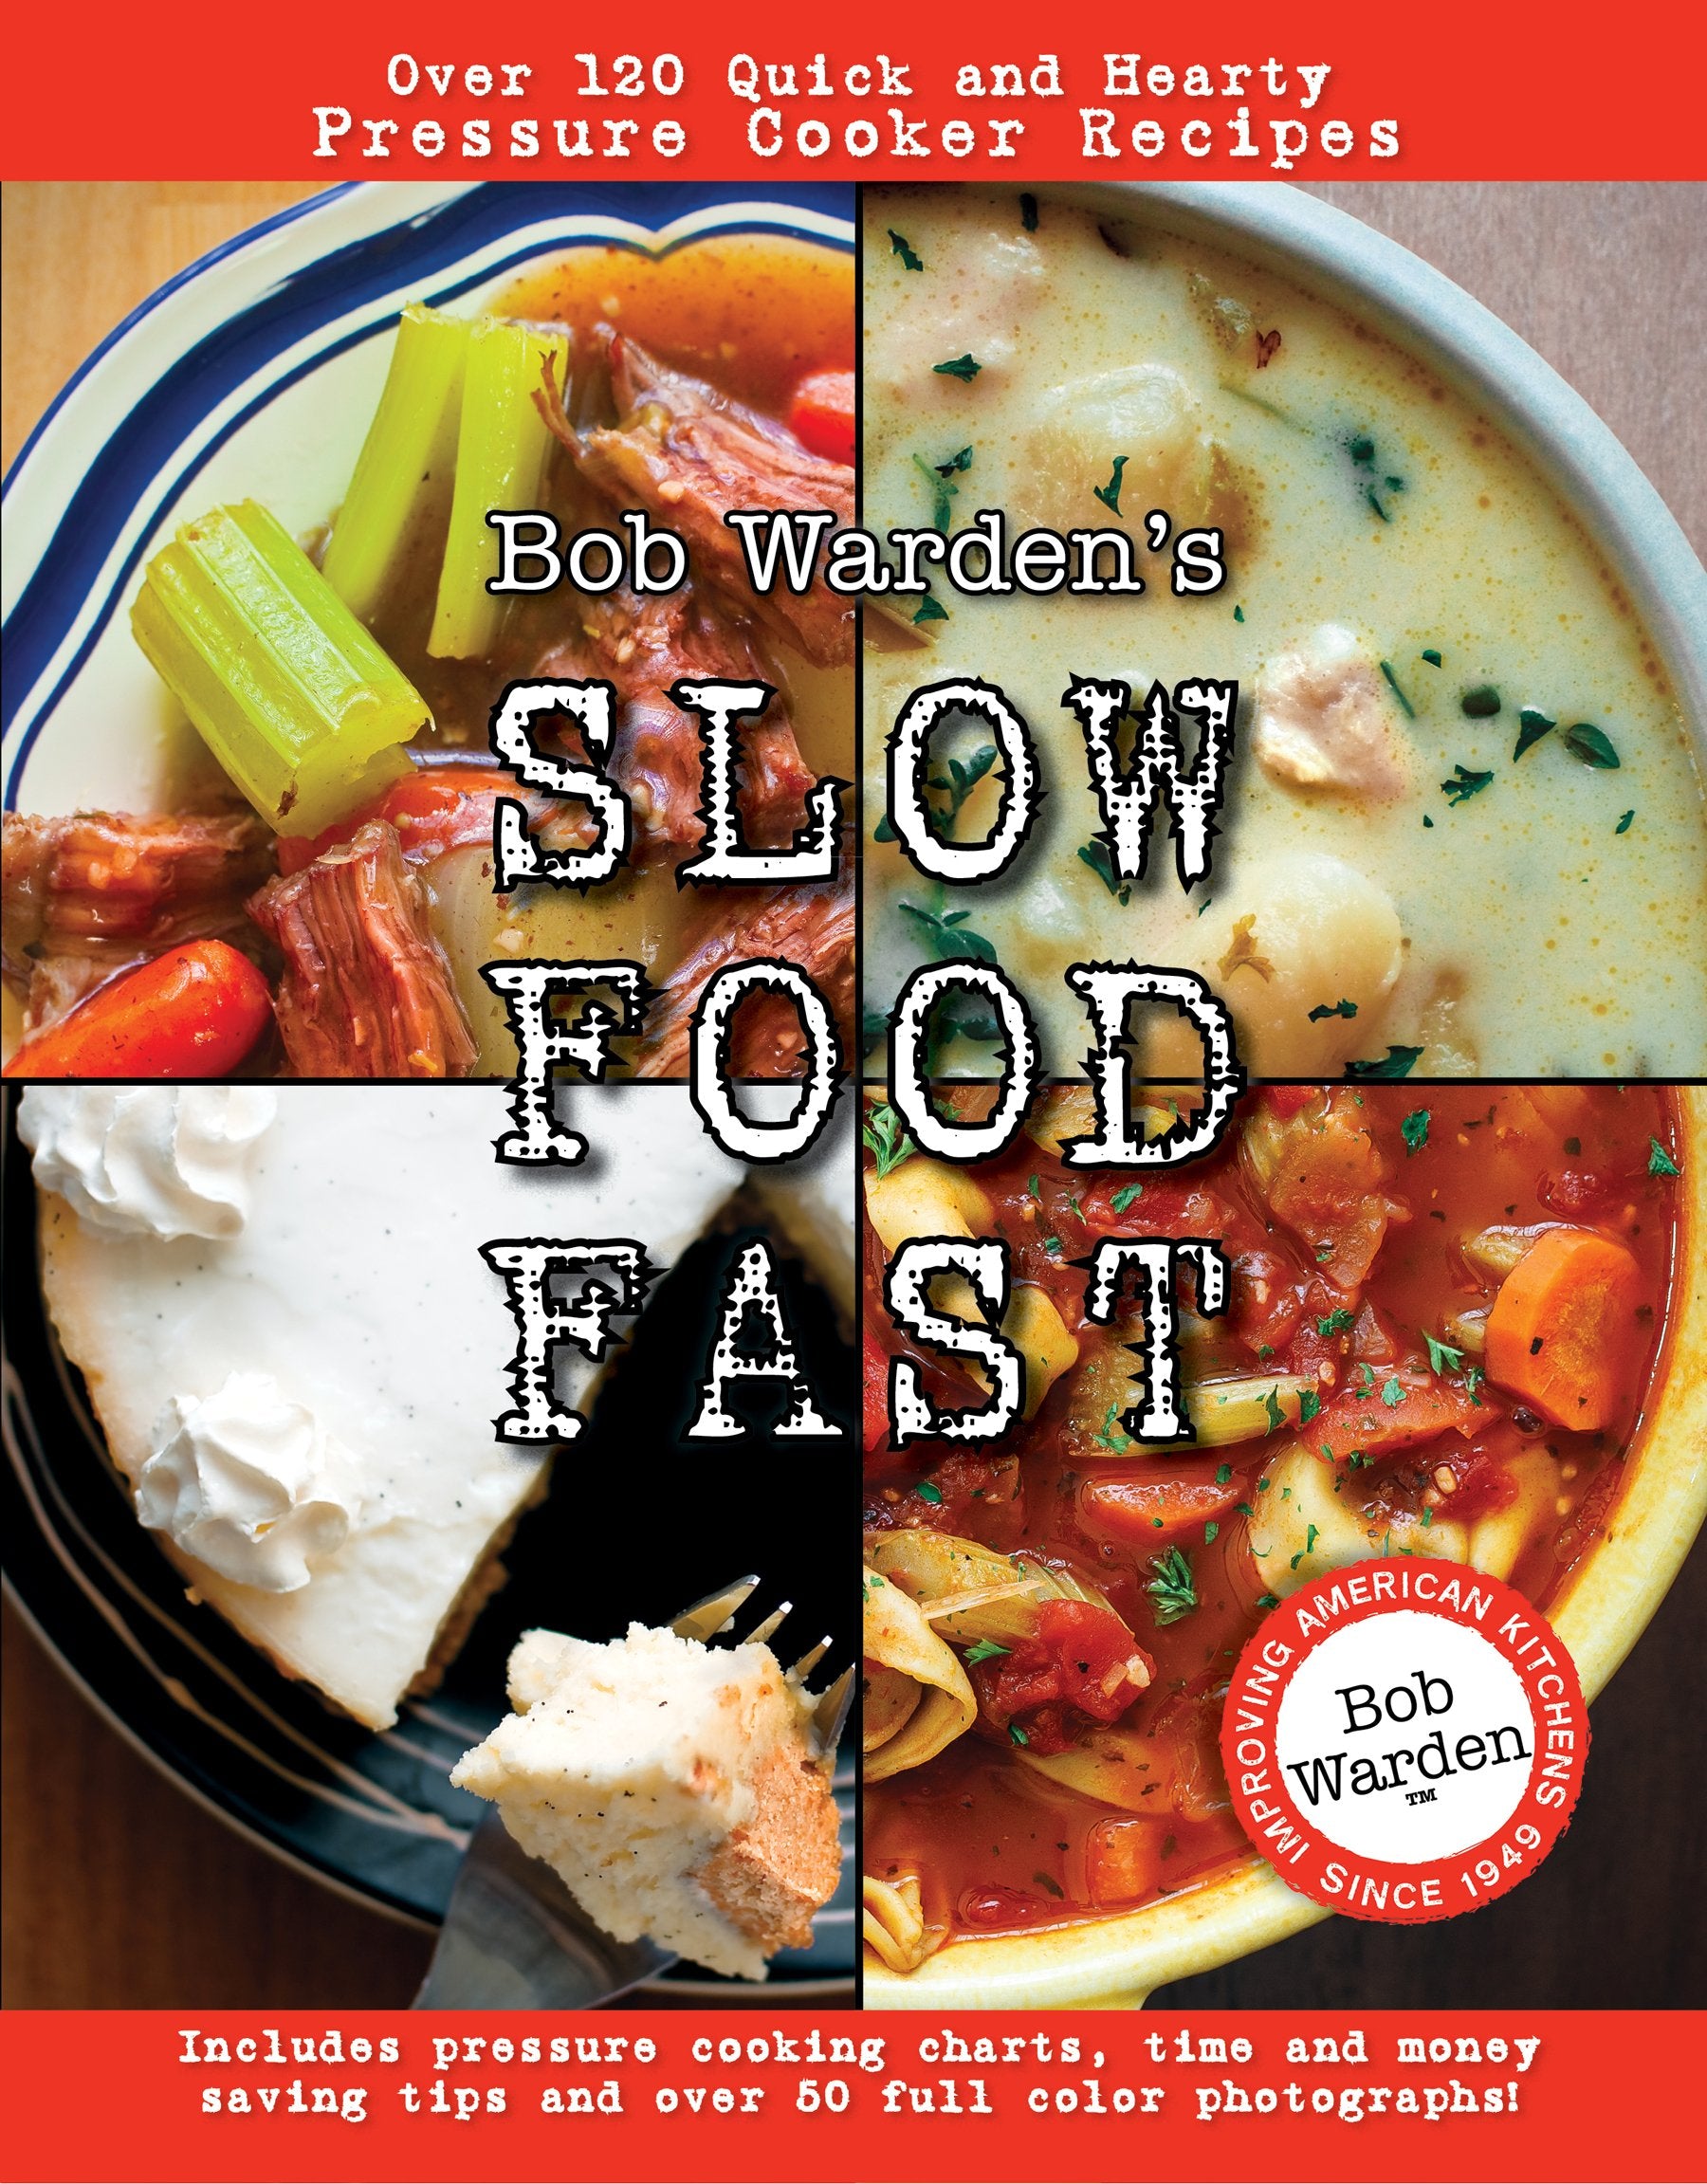 Bob Warden's Slow Food Fast: Over 120 Quick and Hearty Pressure Cooker Recipes